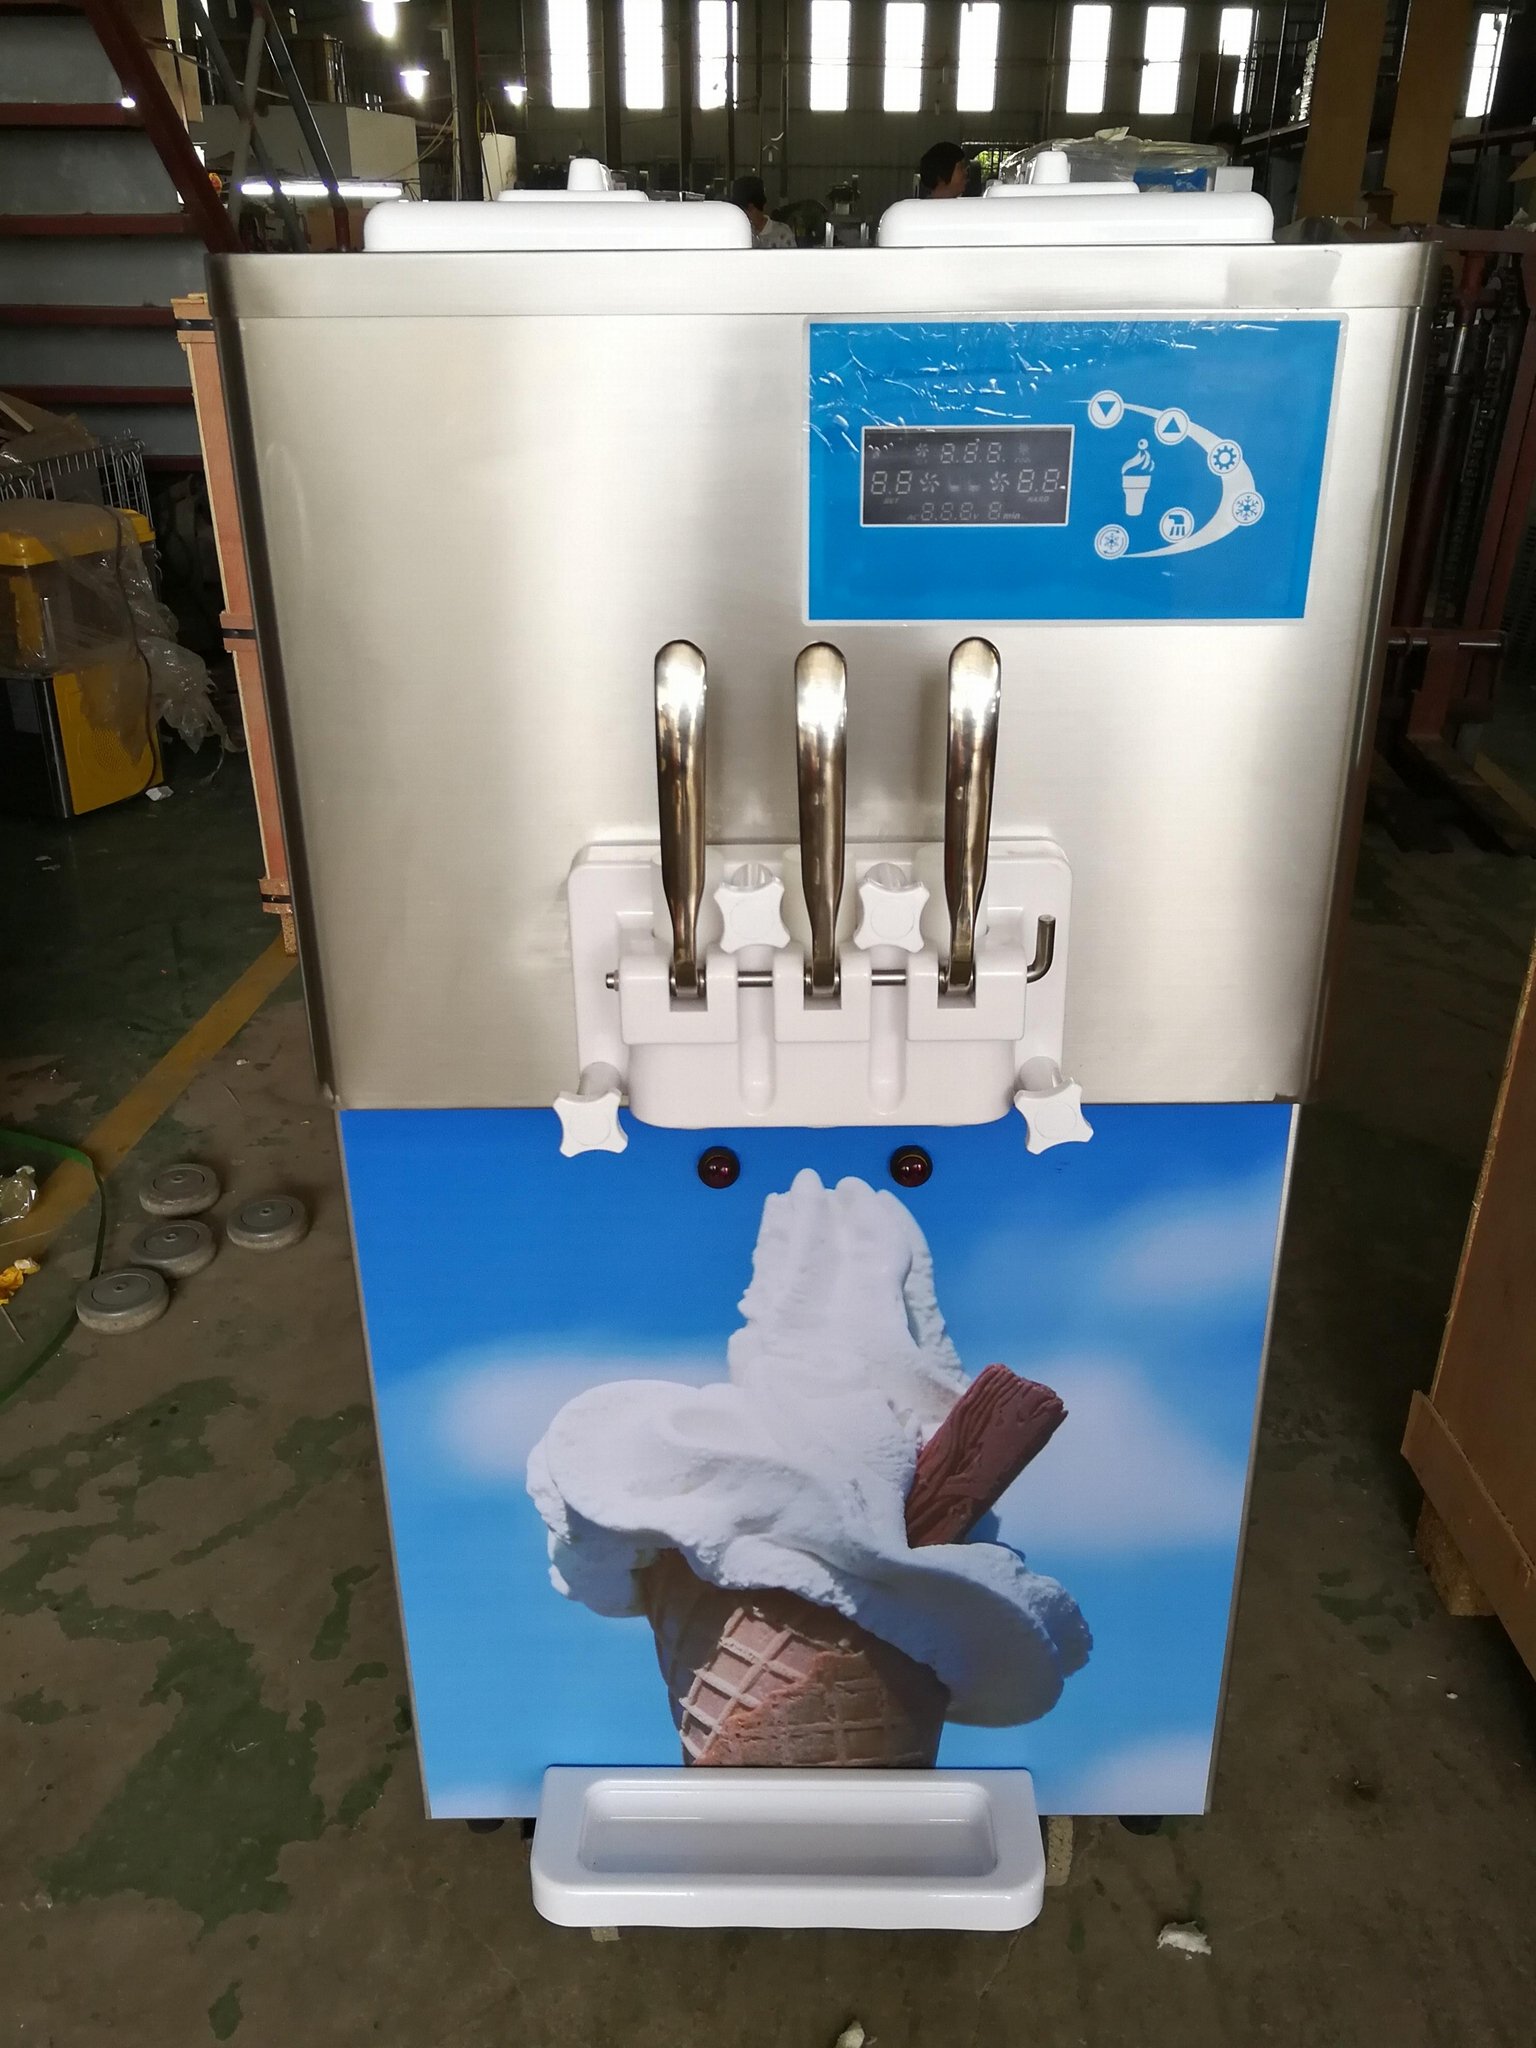 3 Flavor Commercial Soft Ice Cream Machine For Sale